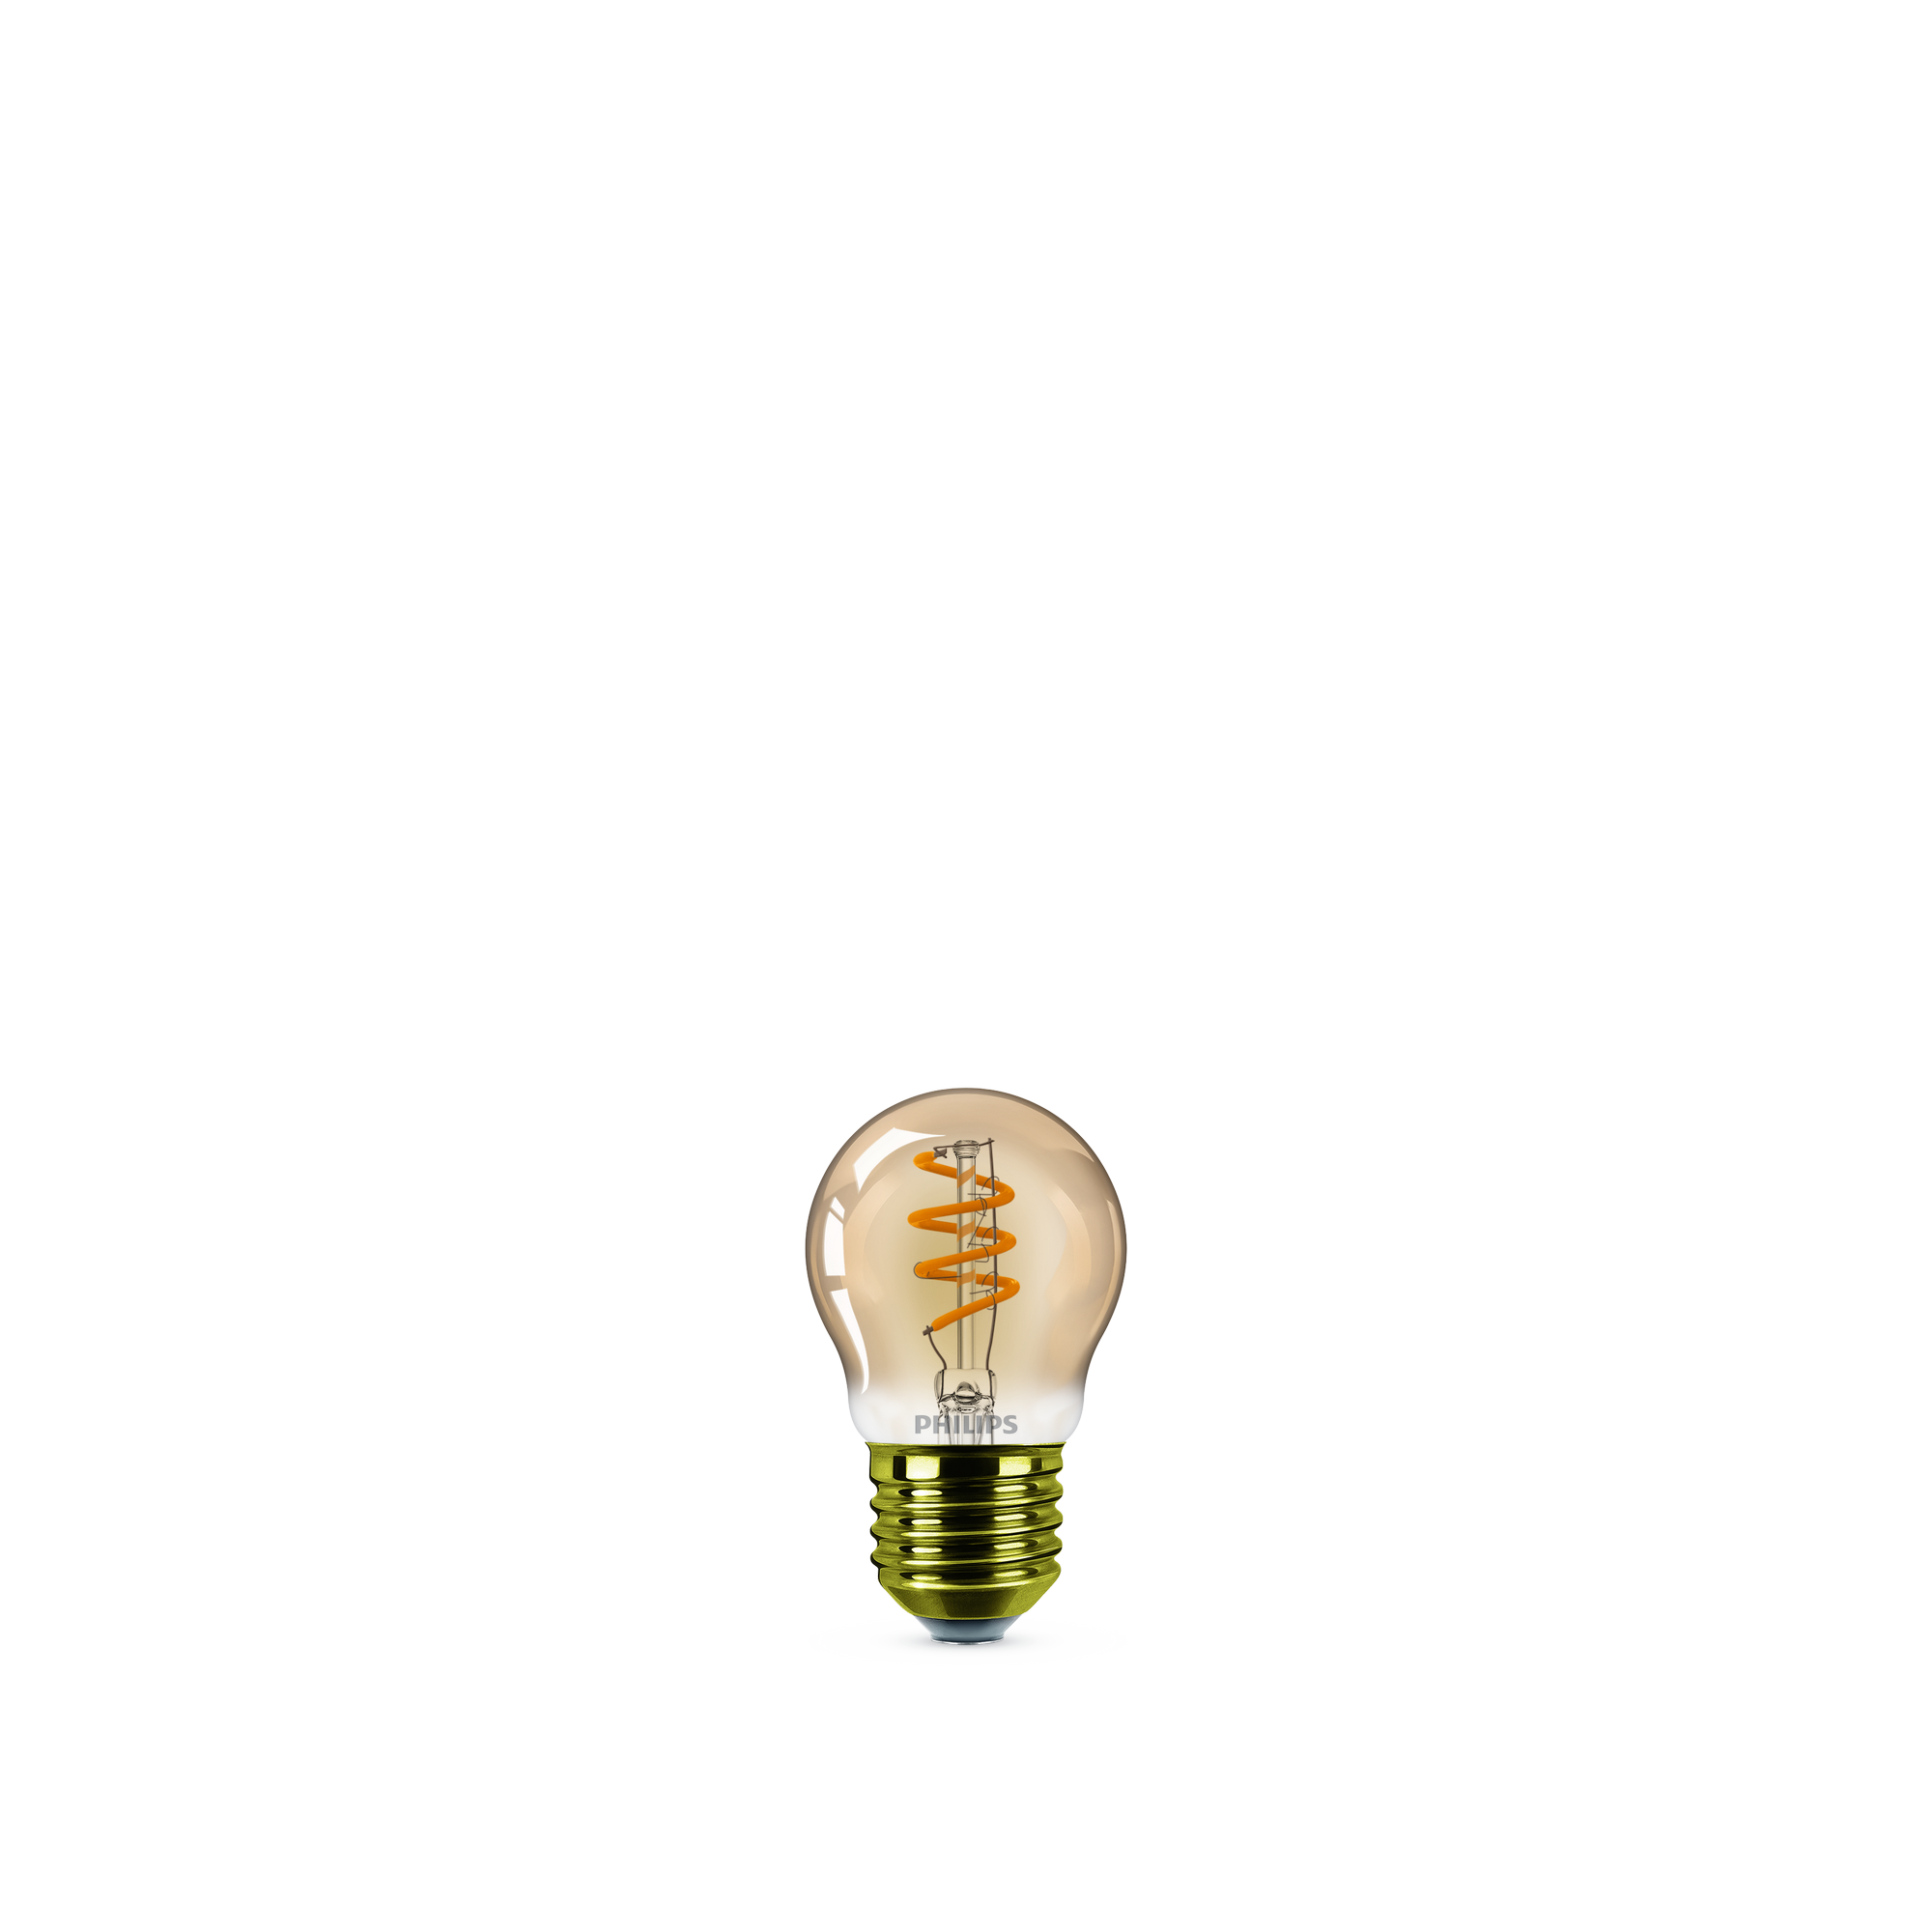 LED-Tropfenlampe 'Vintage' Gold E27 3,5 W, dimmbar + product picture